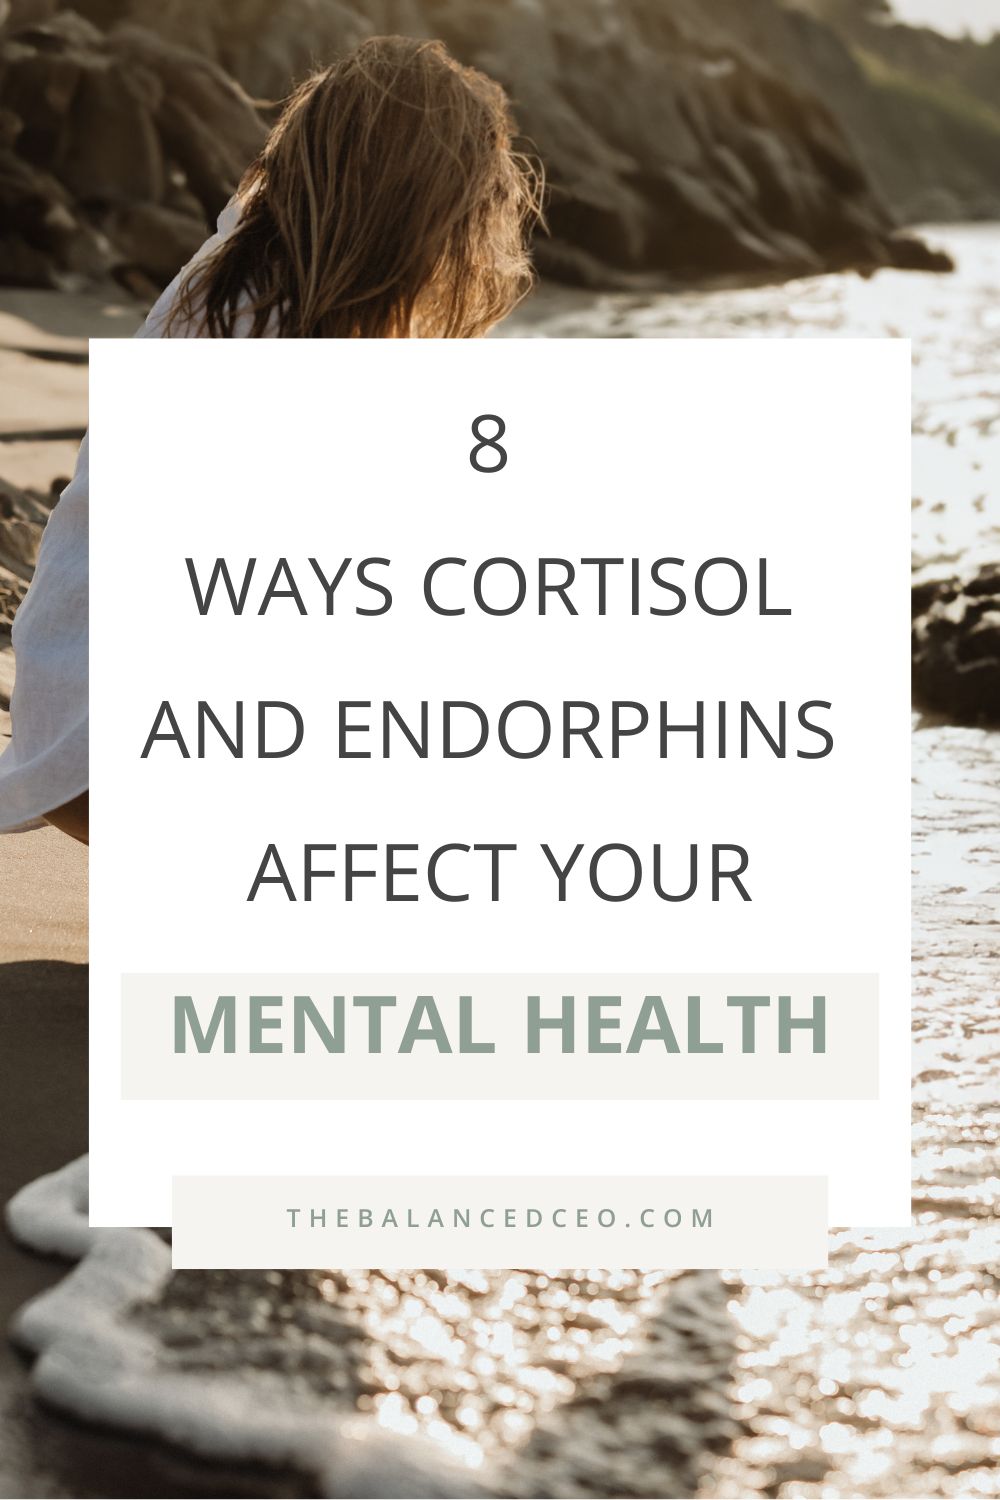 8 Ways Cortisol and Endorphins Affect Your Mental Health